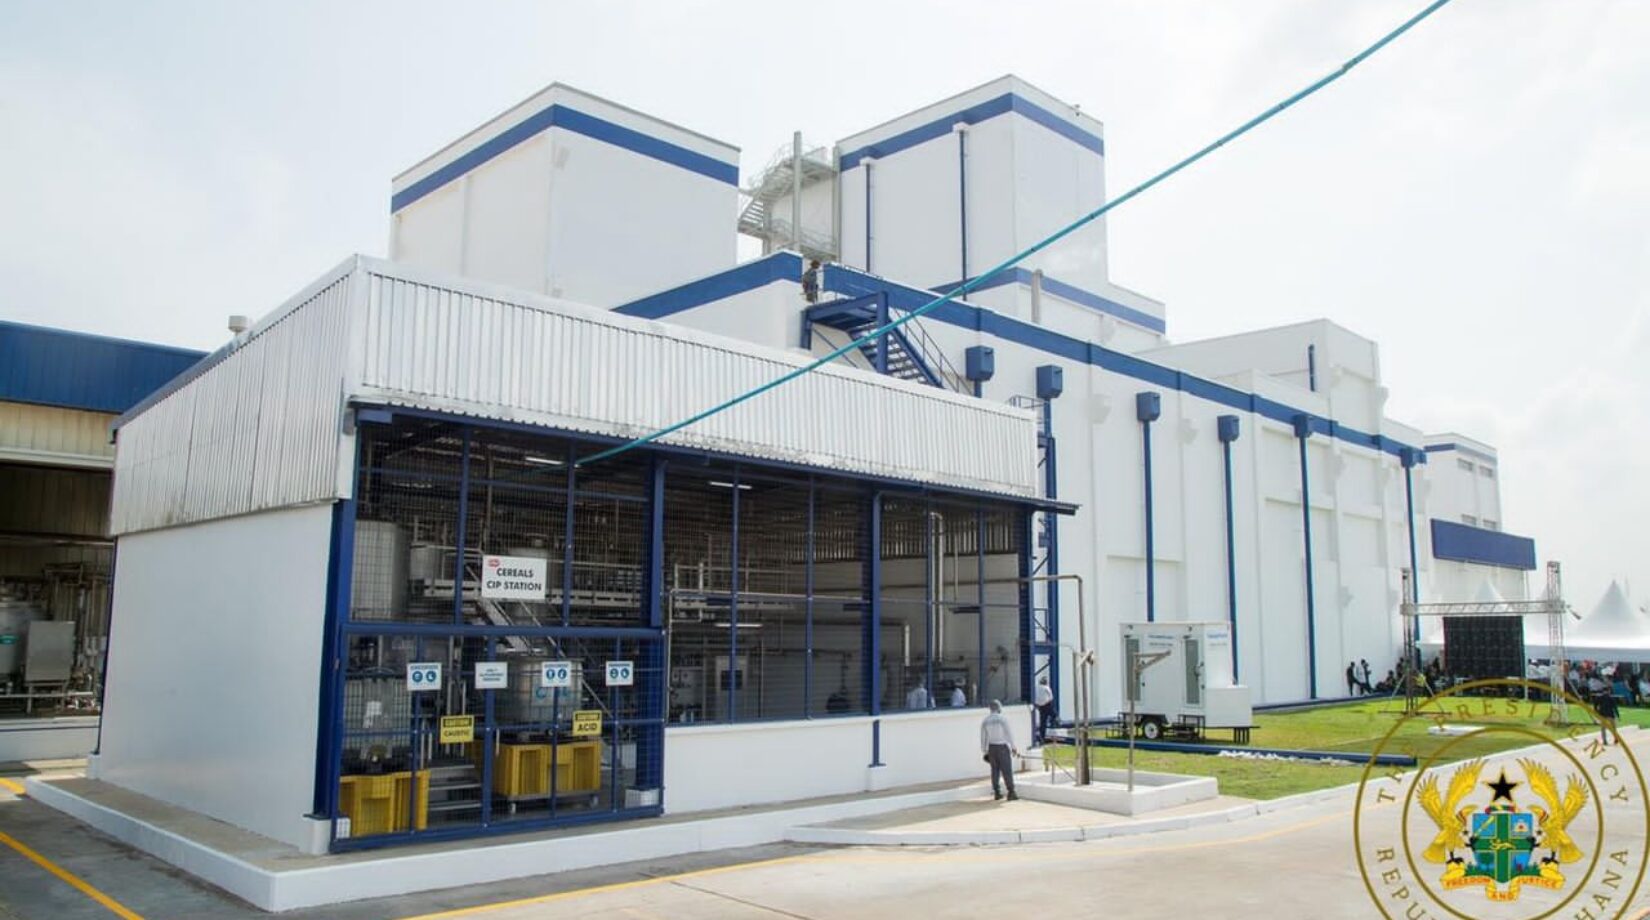 NESTLE BUILDS NEW FACTORY TO PROVIDE JOBS IN GHANA 